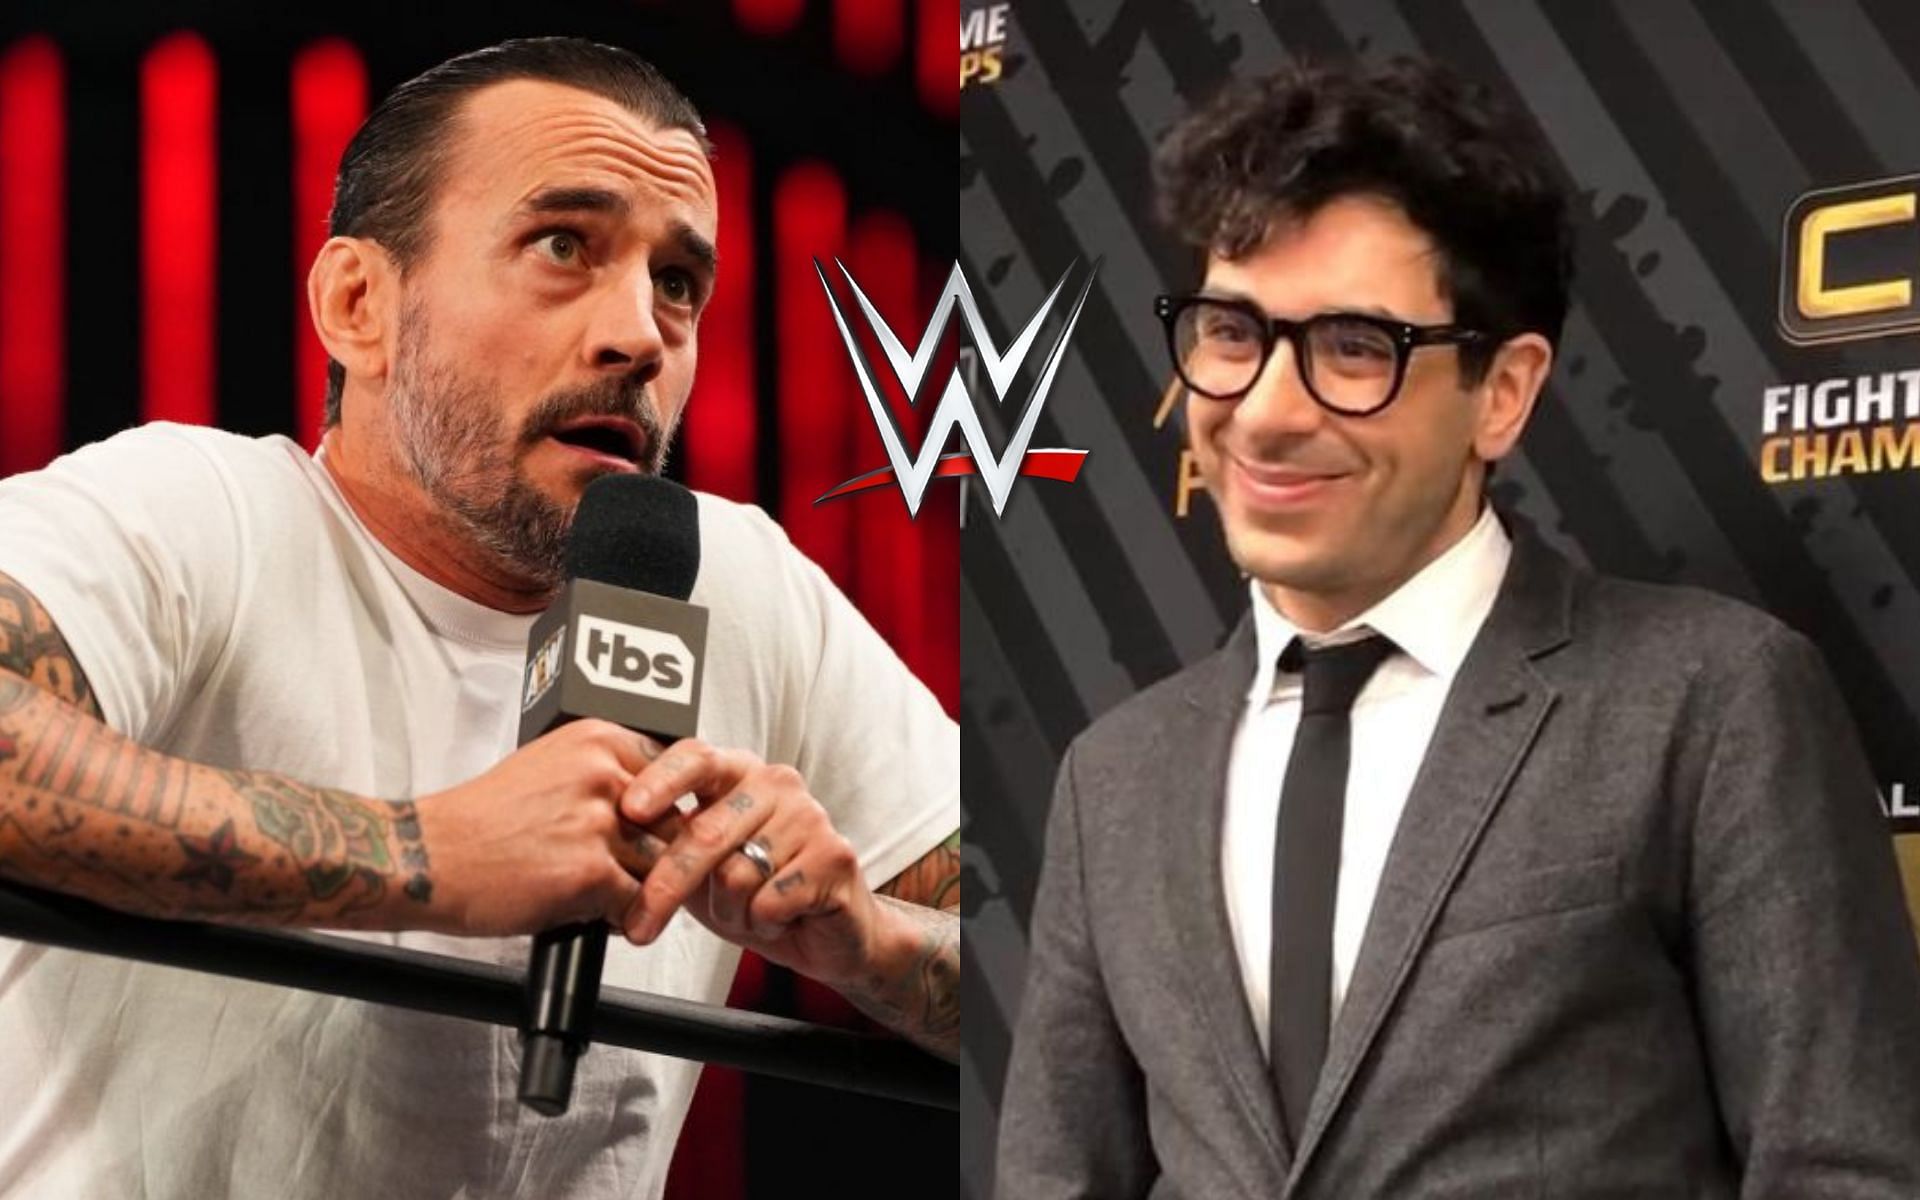 A WWE Hall of Famer recently reacted on the CM Punk drama in Tony Khan